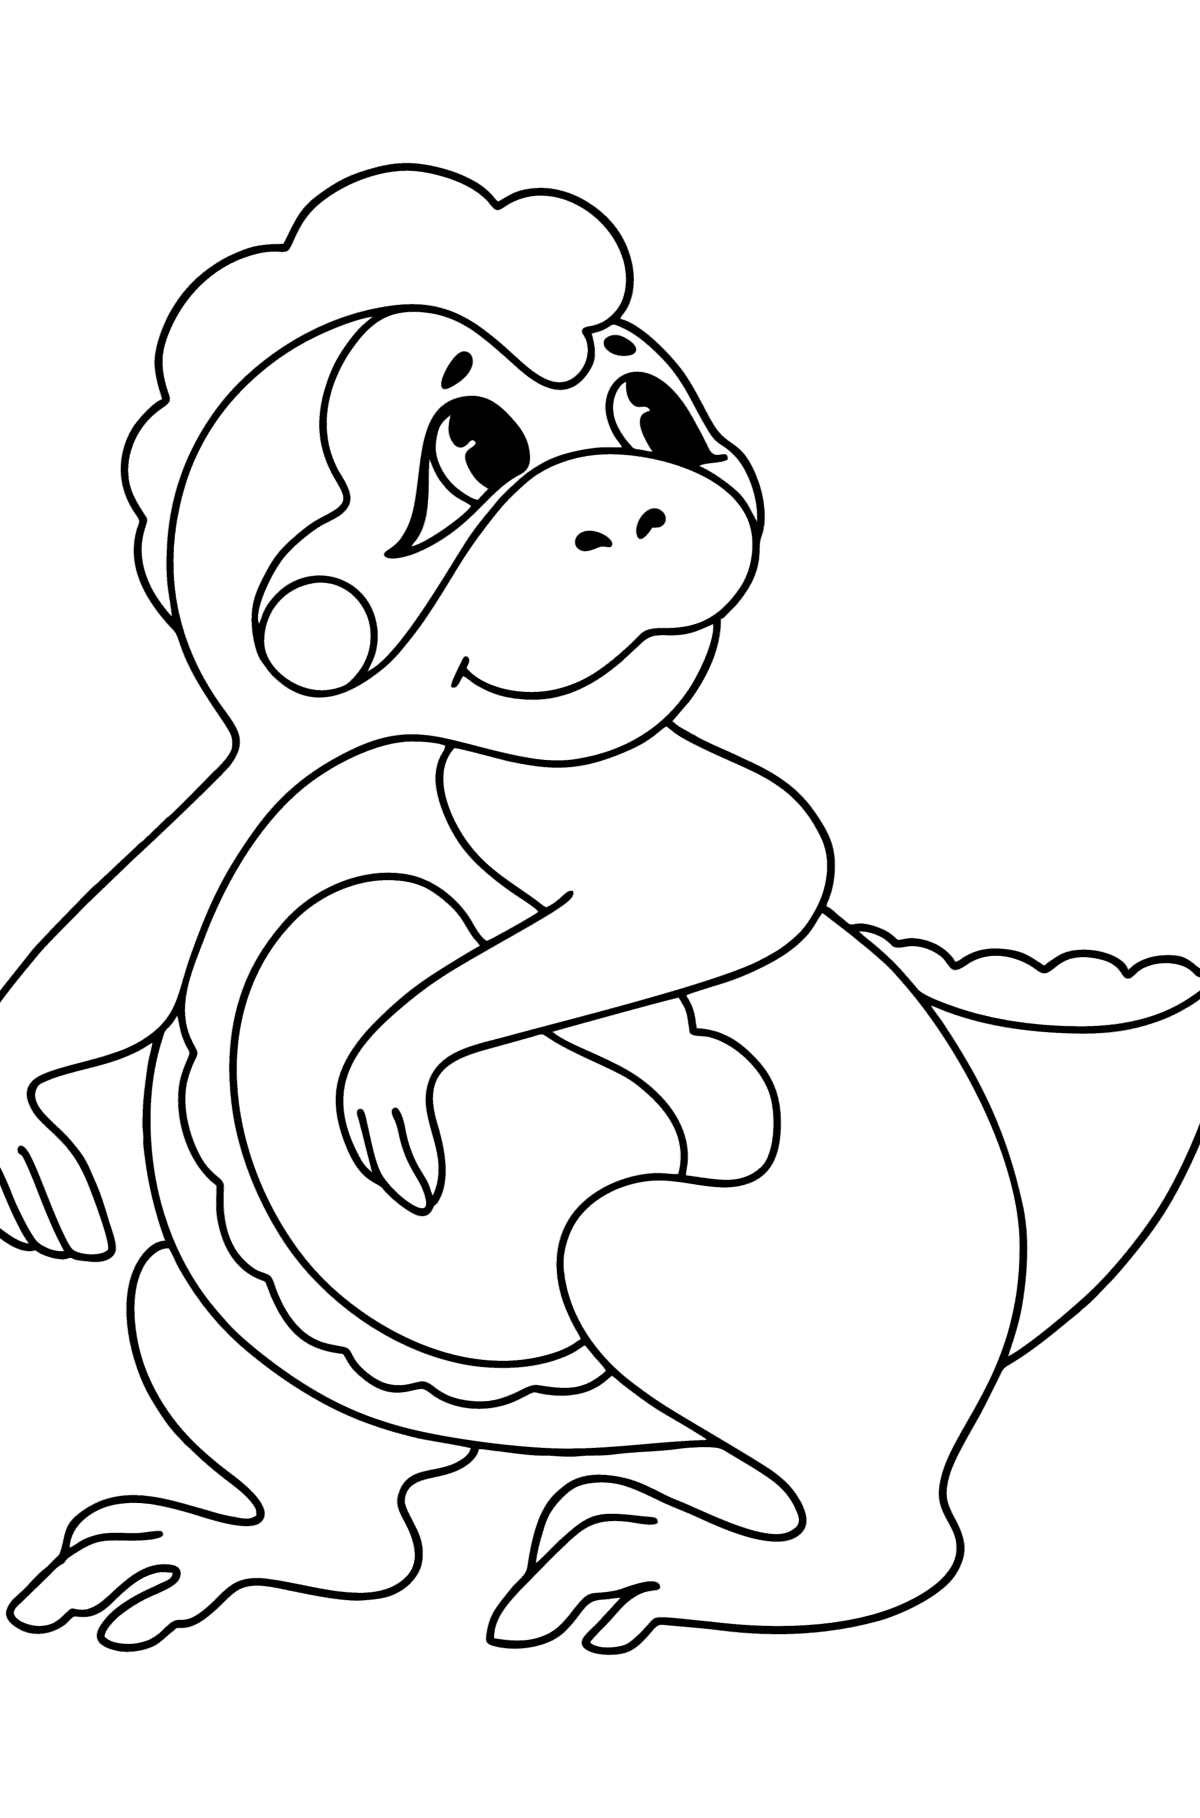 Baby dragon coloring page - Coloring Pages for Kids